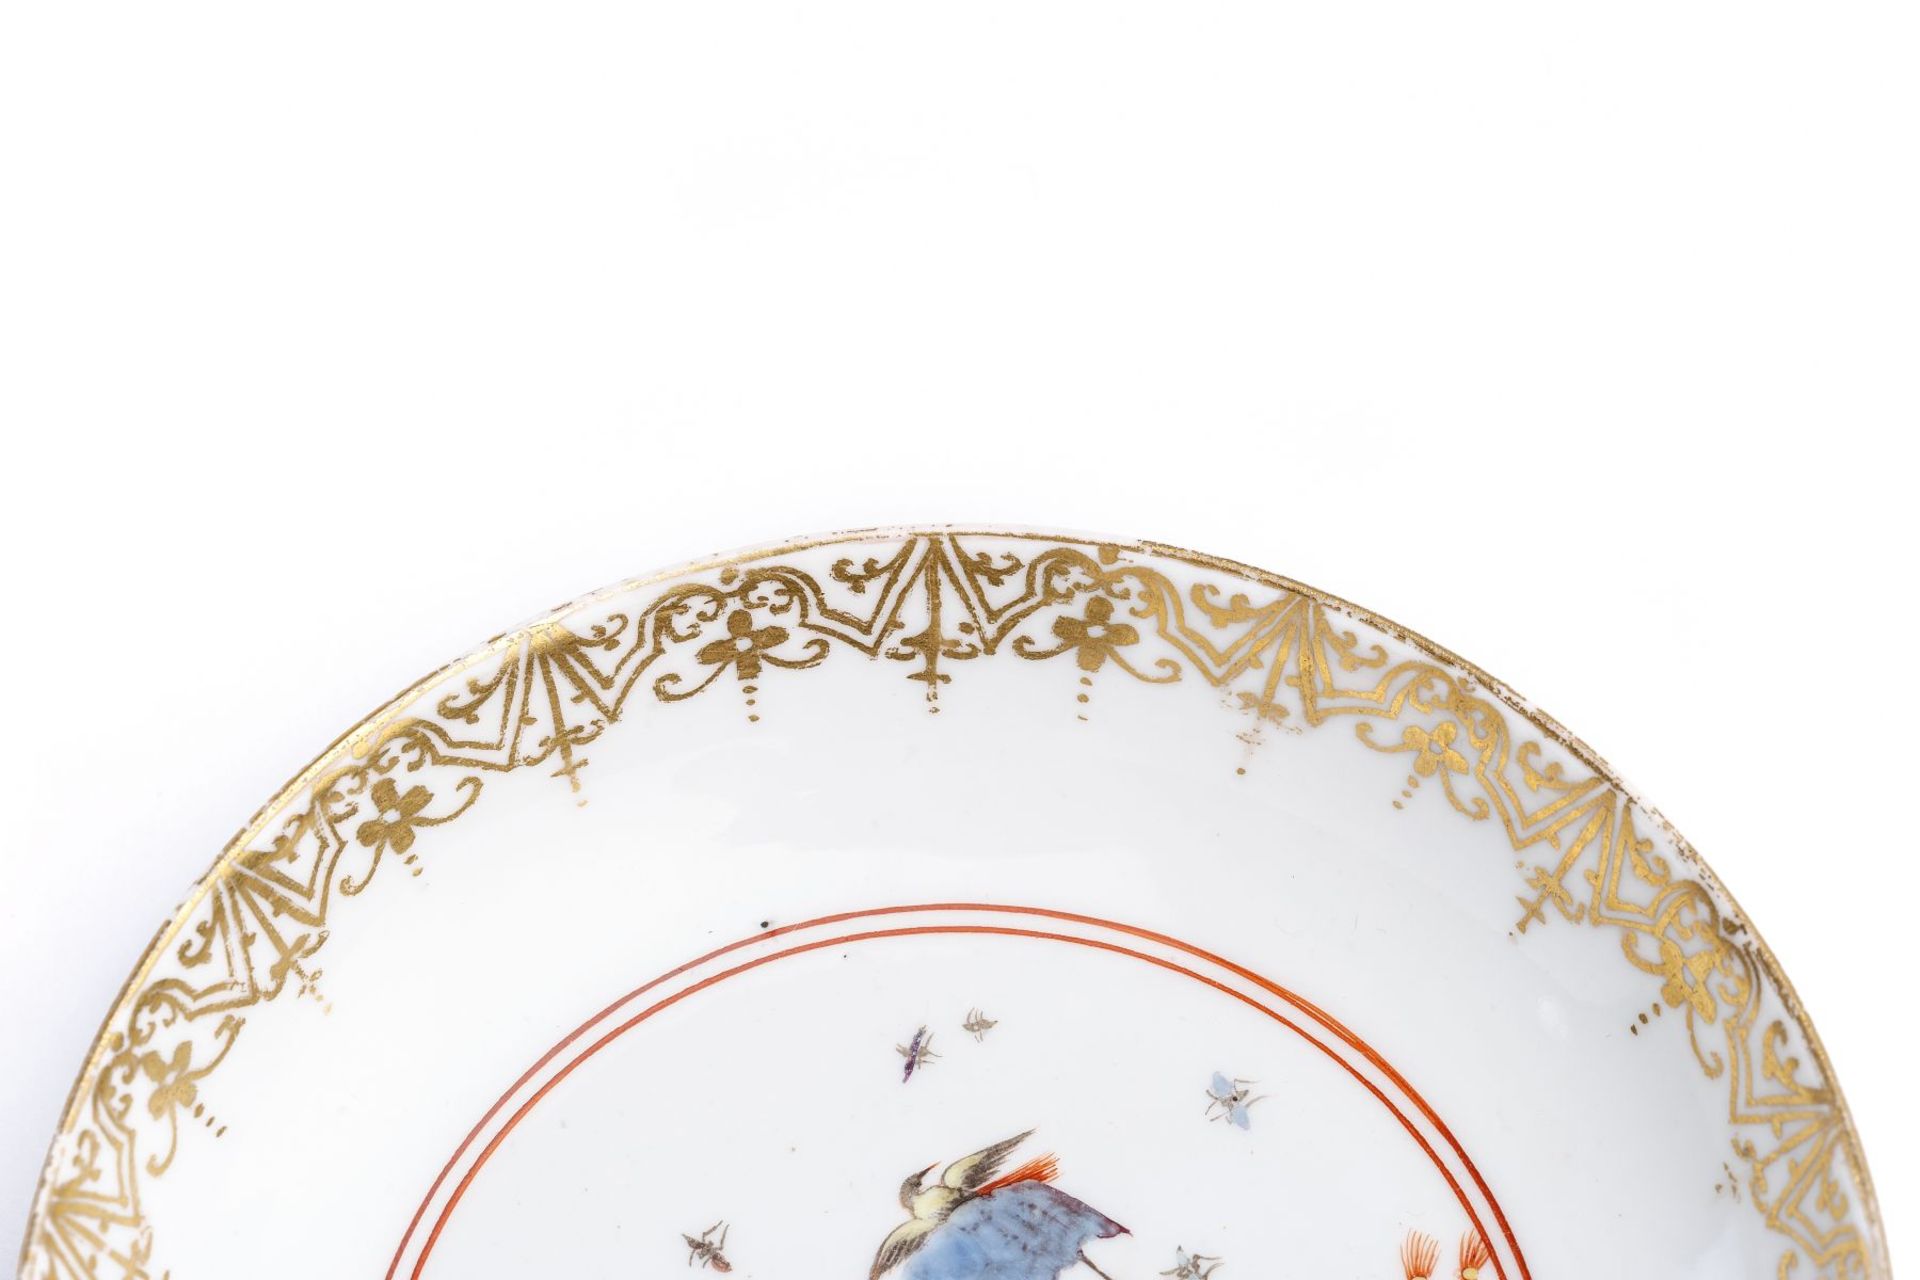 Small Saucer, Meissen 1730/35 - Image 2 of 4